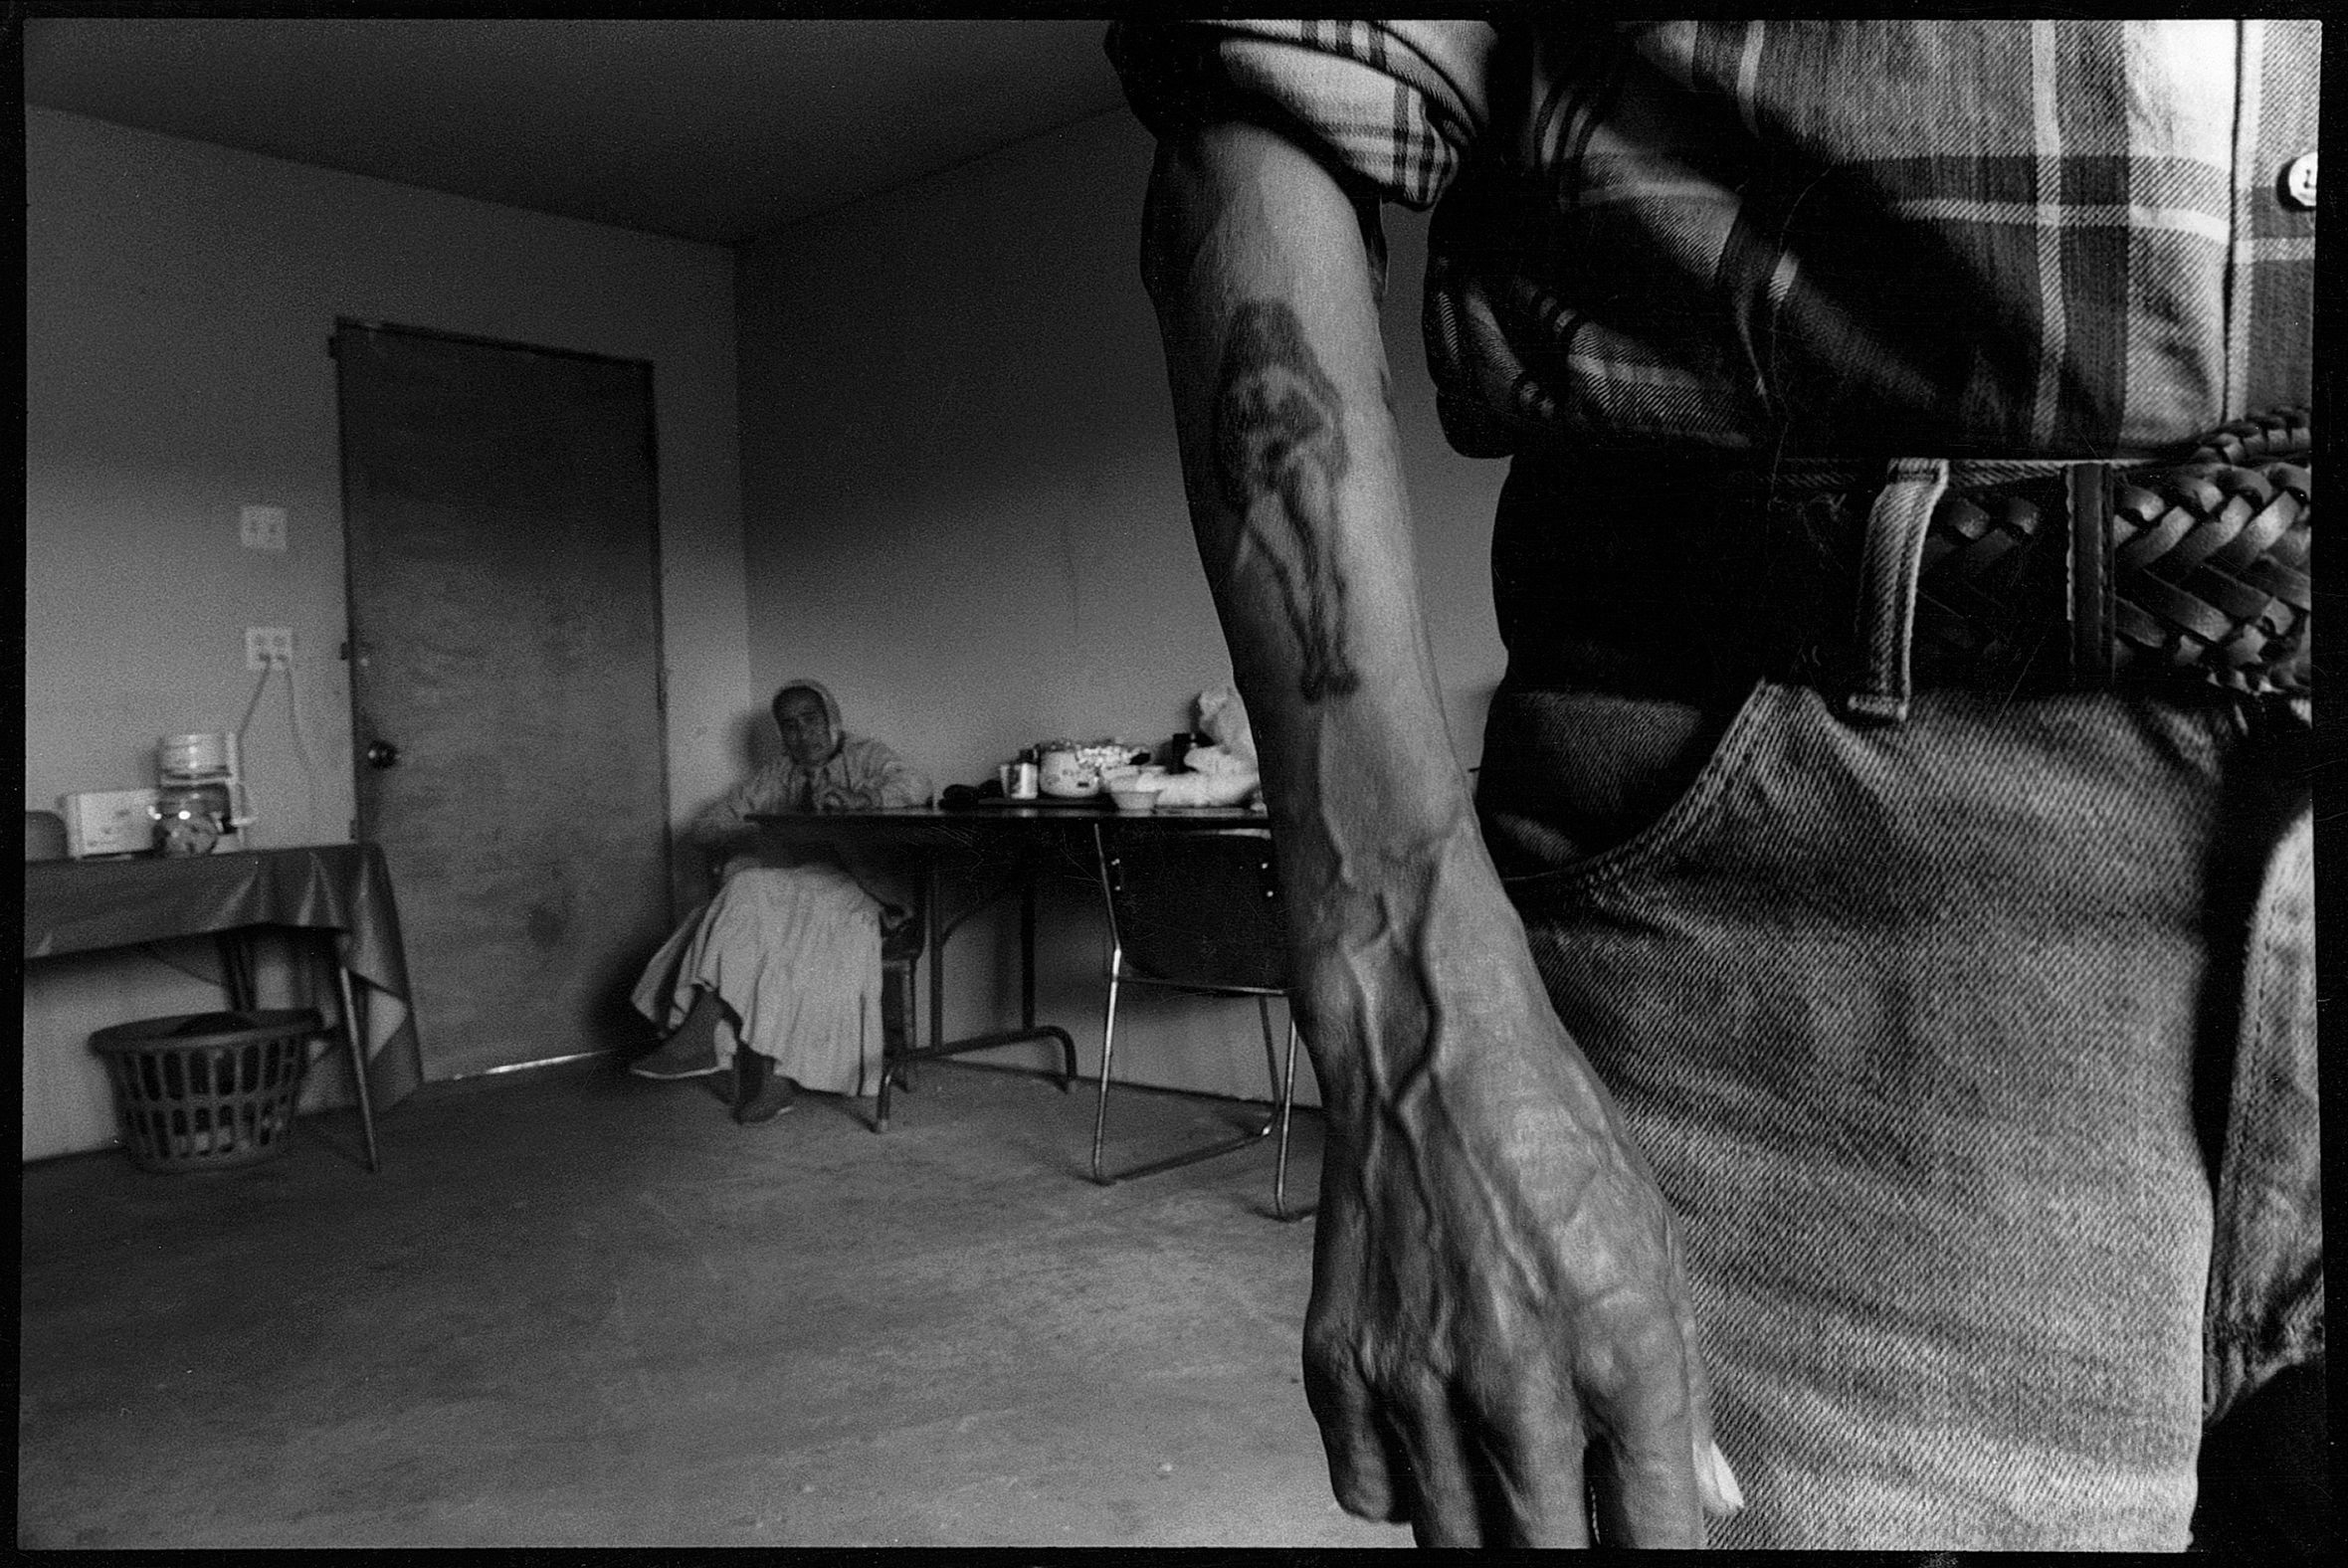 An older woman in a long dress sits in the back corner of a sparsely furnished room while a man stands in the foreground wearing jeans and a plaid shirt with the sleeves folded up. He has a tattoo of a naked woman on his forearm.